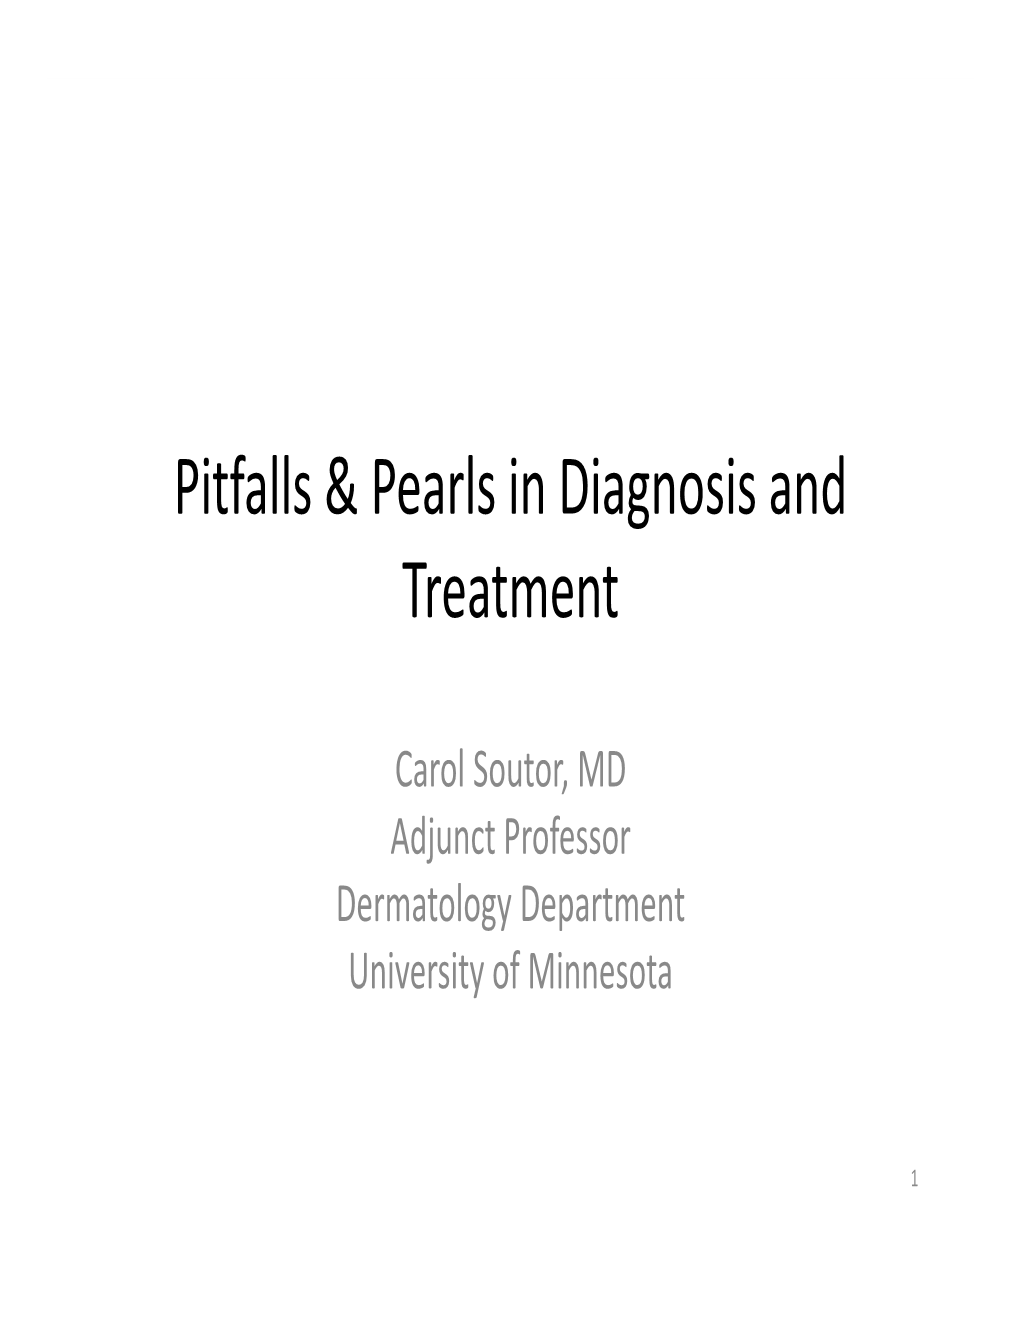 Pitfalls & Pearls in Diagnosis and Treatment